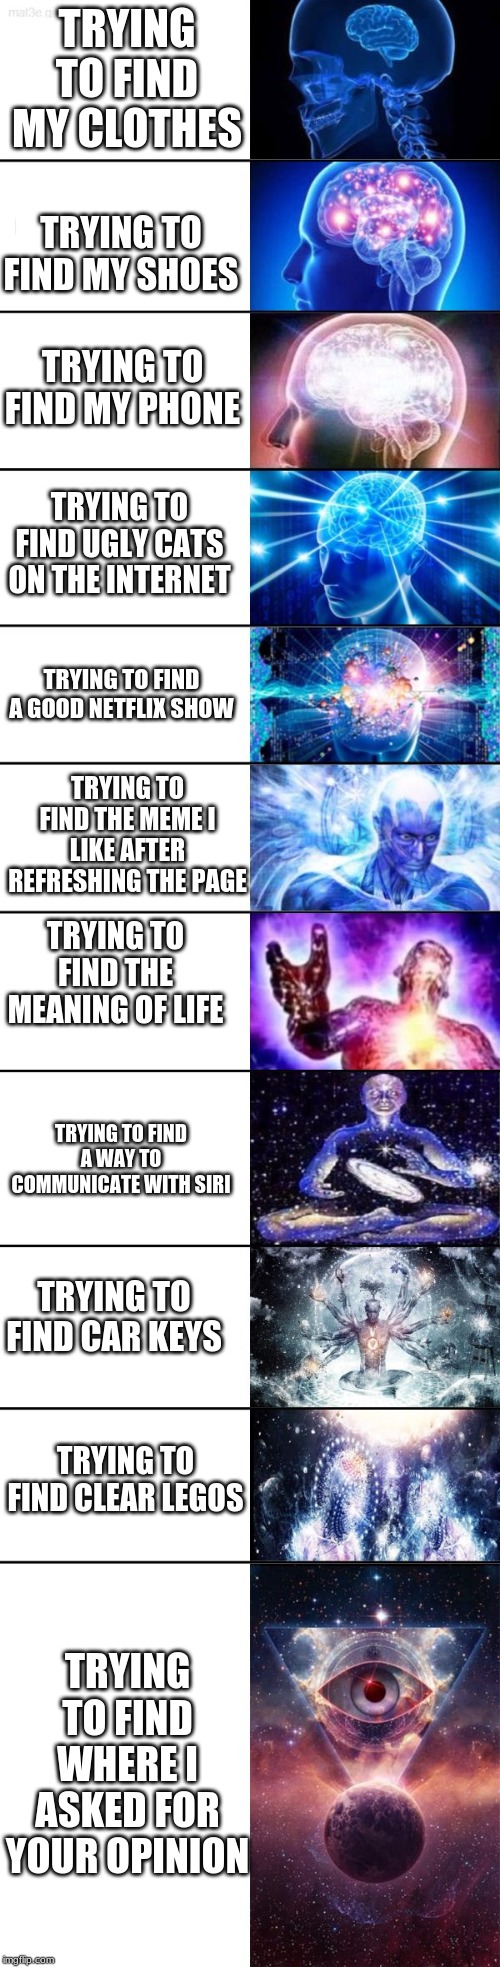 Big Brain Meme | TRYING TO FIND MY CLOTHES; TRYING TO FIND MY SHOES; TRYING TO FIND MY PHONE; TRYING TO FIND UGLY CATS ON THE INTERNET; TRYING TO FIND A GOOD NETFLIX SHOW; TRYING TO FIND THE MEME I LIKE AFTER REFRESHING THE PAGE; TRYING TO FIND THE MEANING OF LIFE; TRYING TO FIND A WAY TO COMMUNICATE WITH SIRI; TRYING TO FIND CAR KEYS; TRYING TO FIND CLEAR LEGOS; TRYING TO FIND WHERE I ASKED FOR YOUR OPINION | image tagged in big brain meme | made w/ Imgflip meme maker